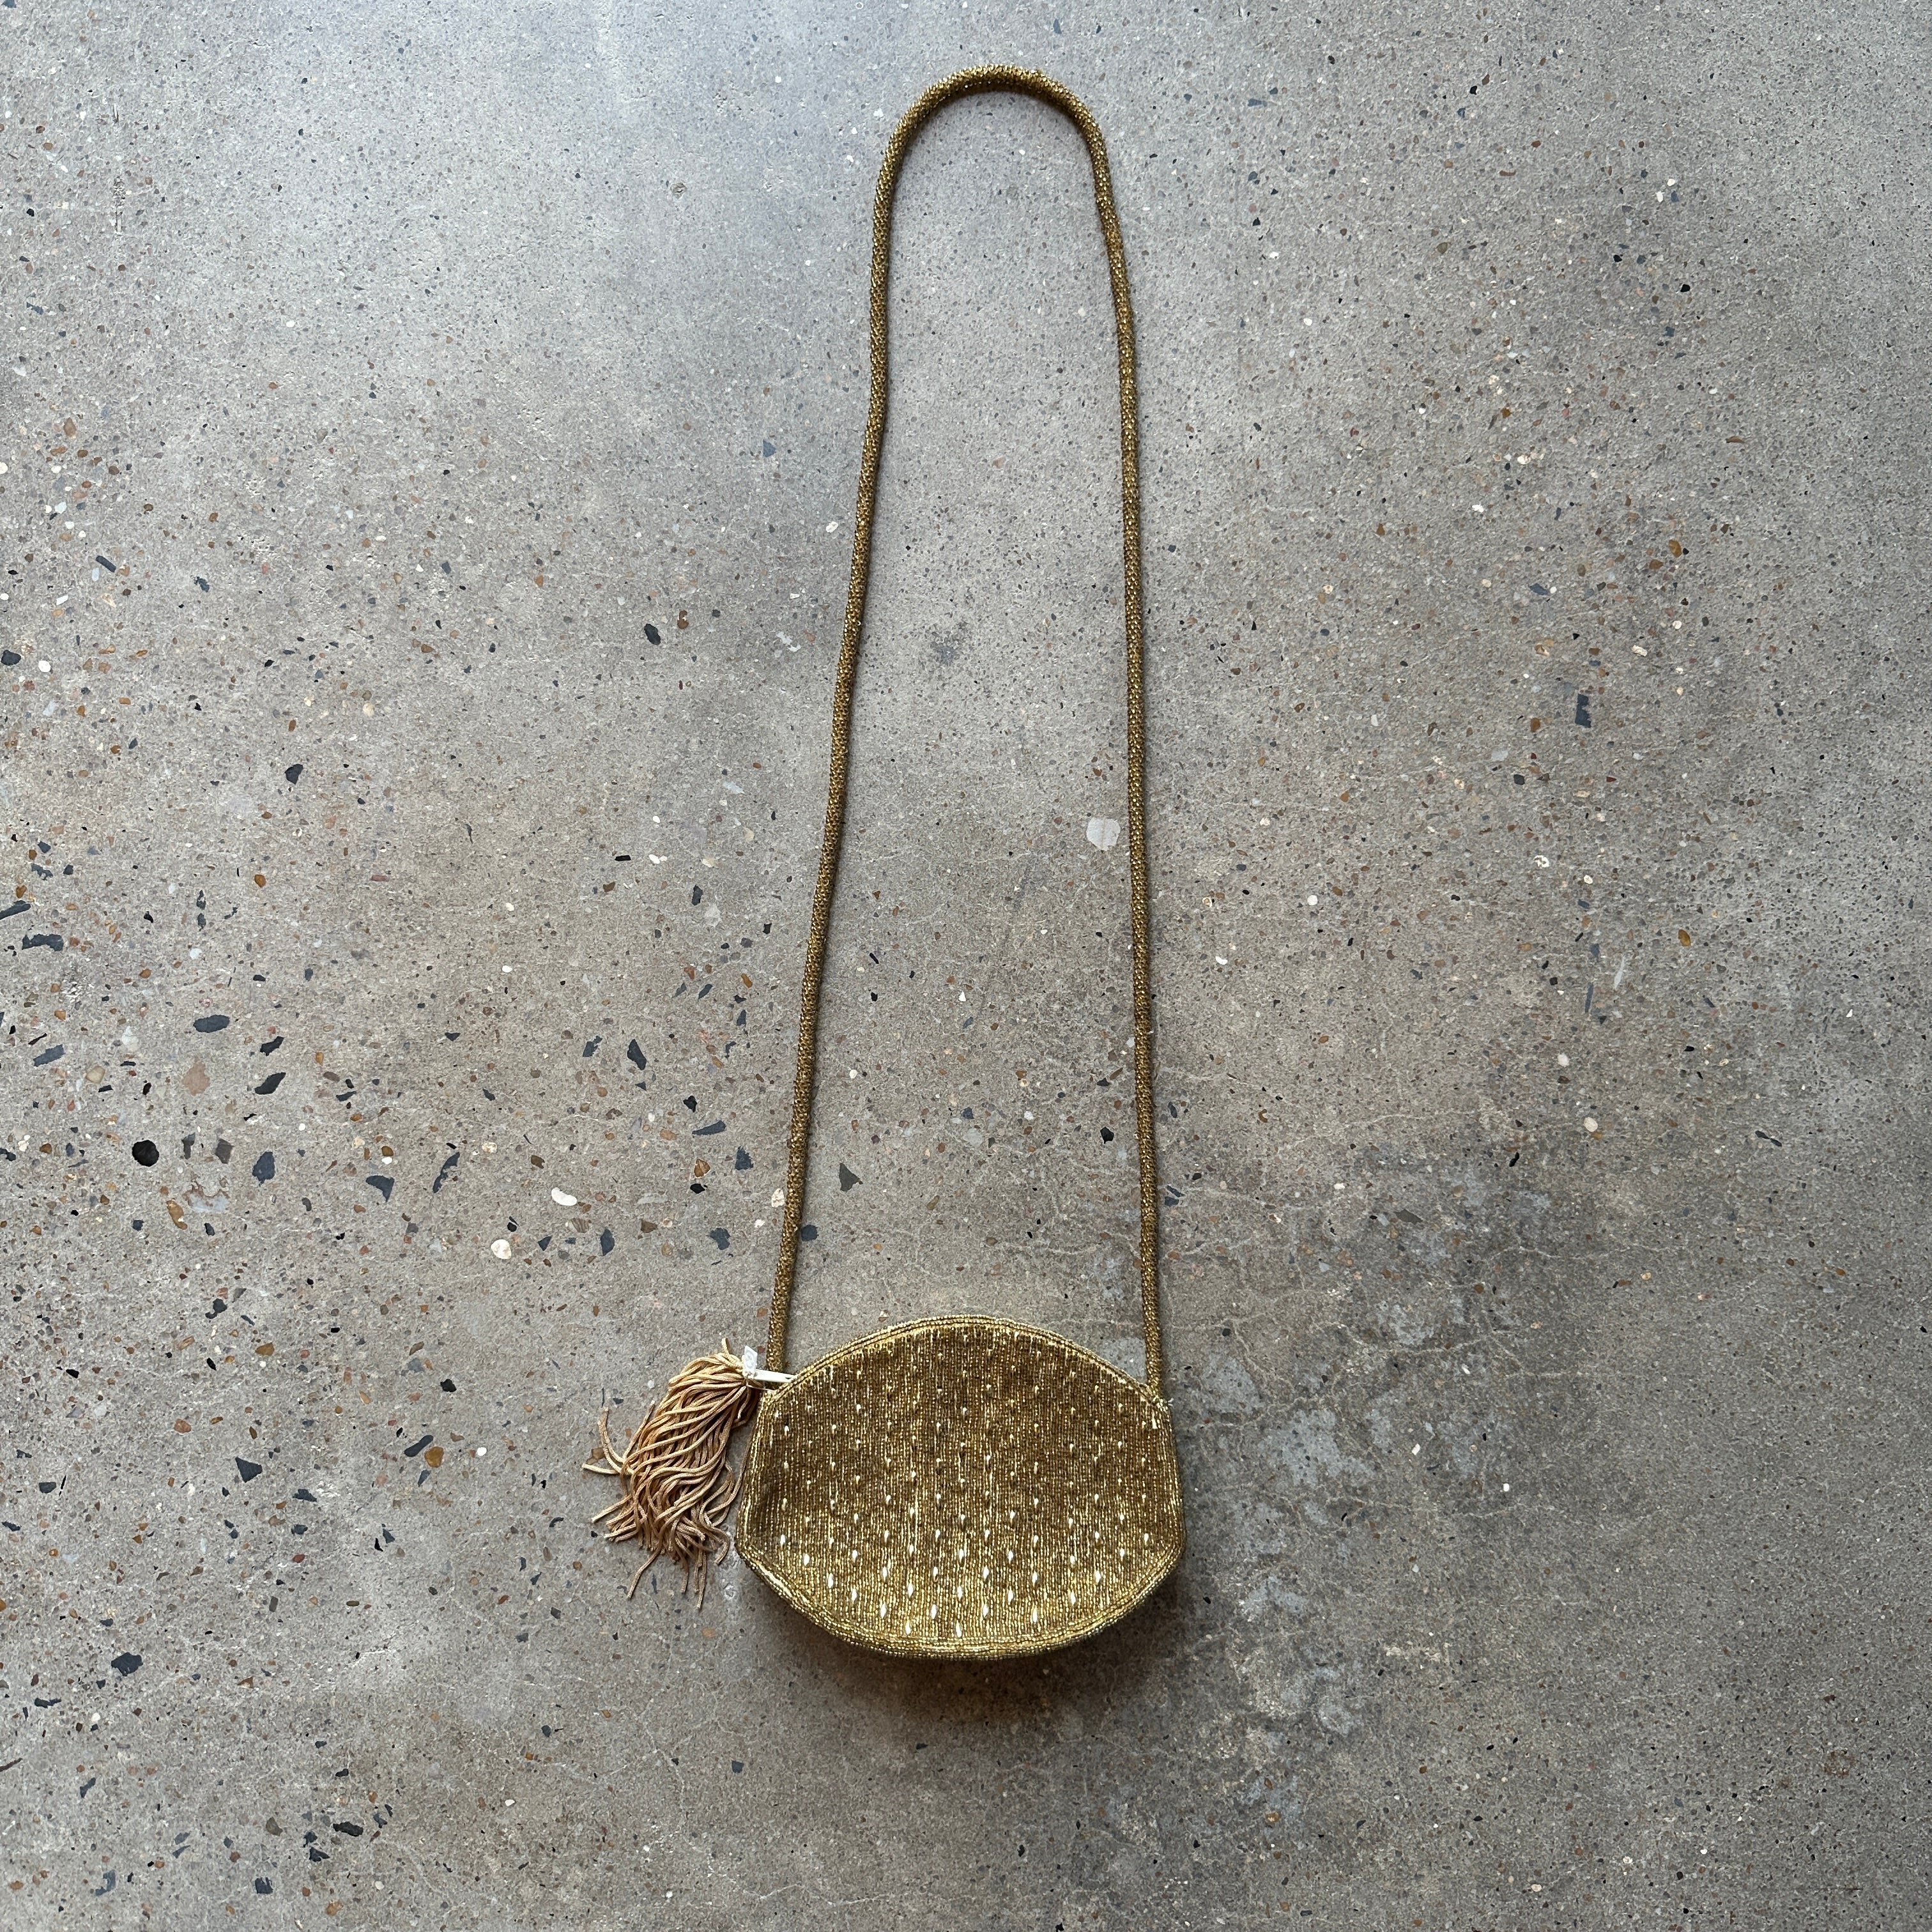 Vintage Gold/Champagne Beaded Handmade Purse